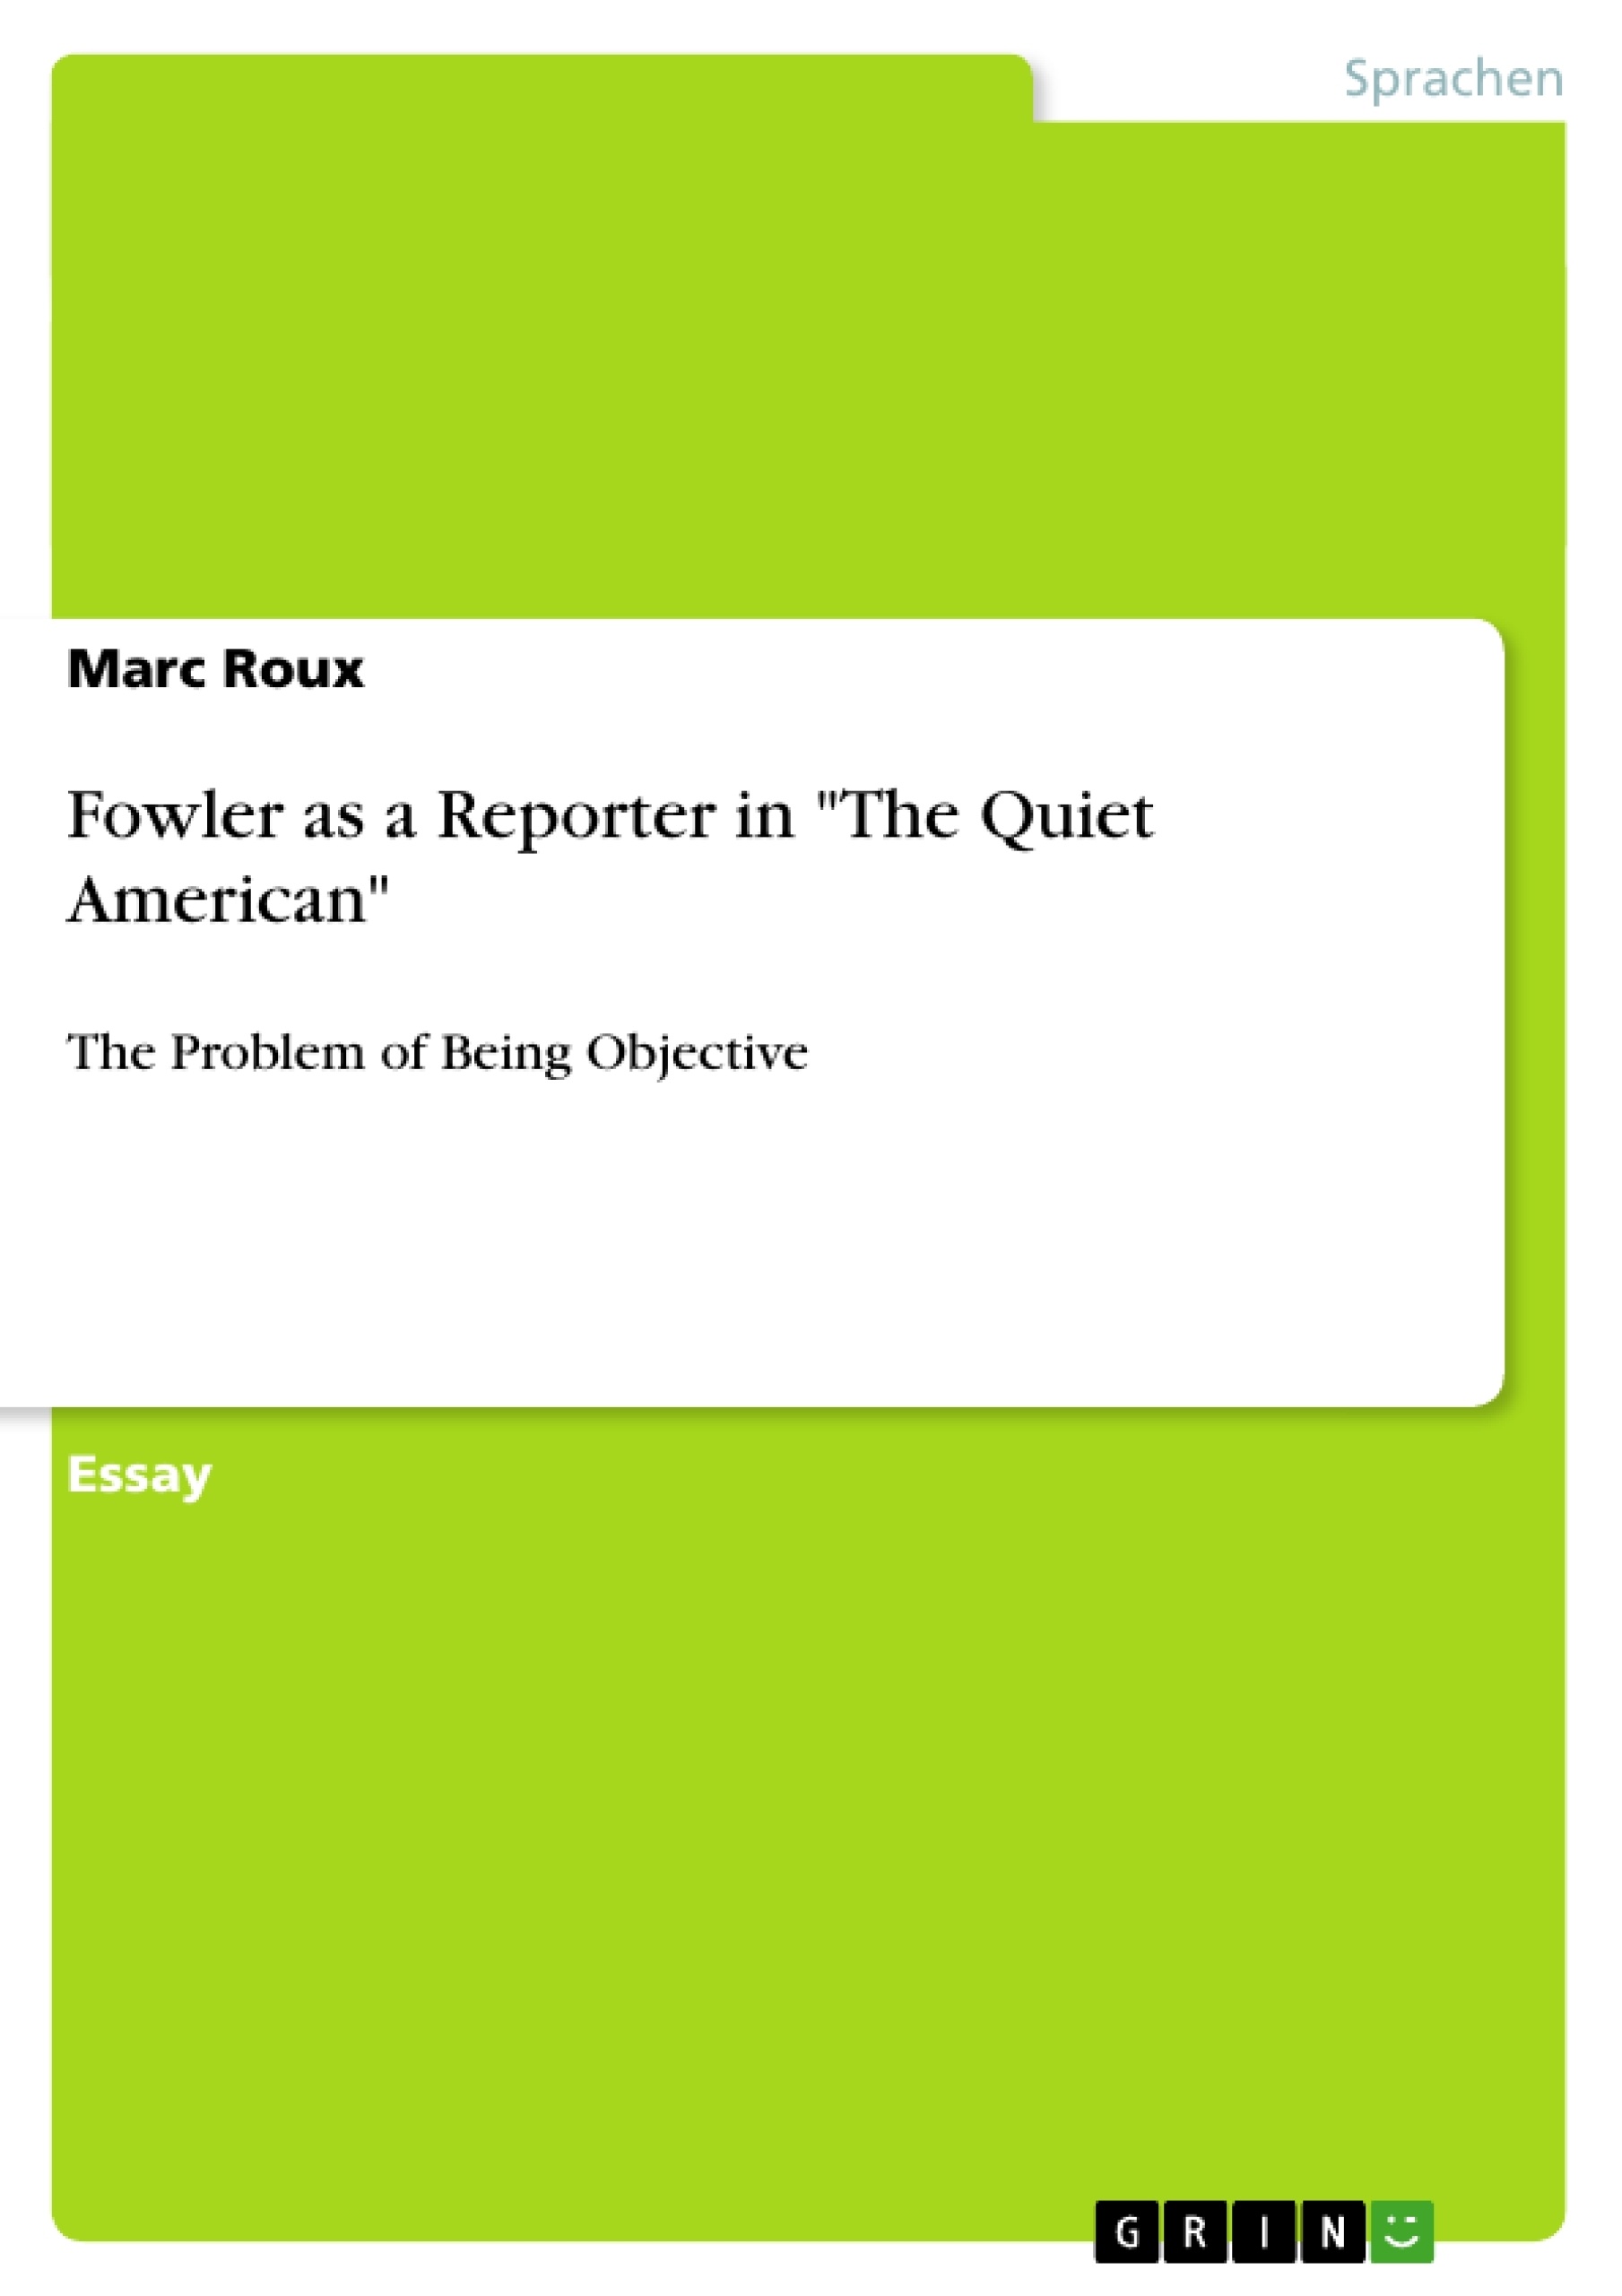 Título: Fowler as a Reporter in "The Quiet American"